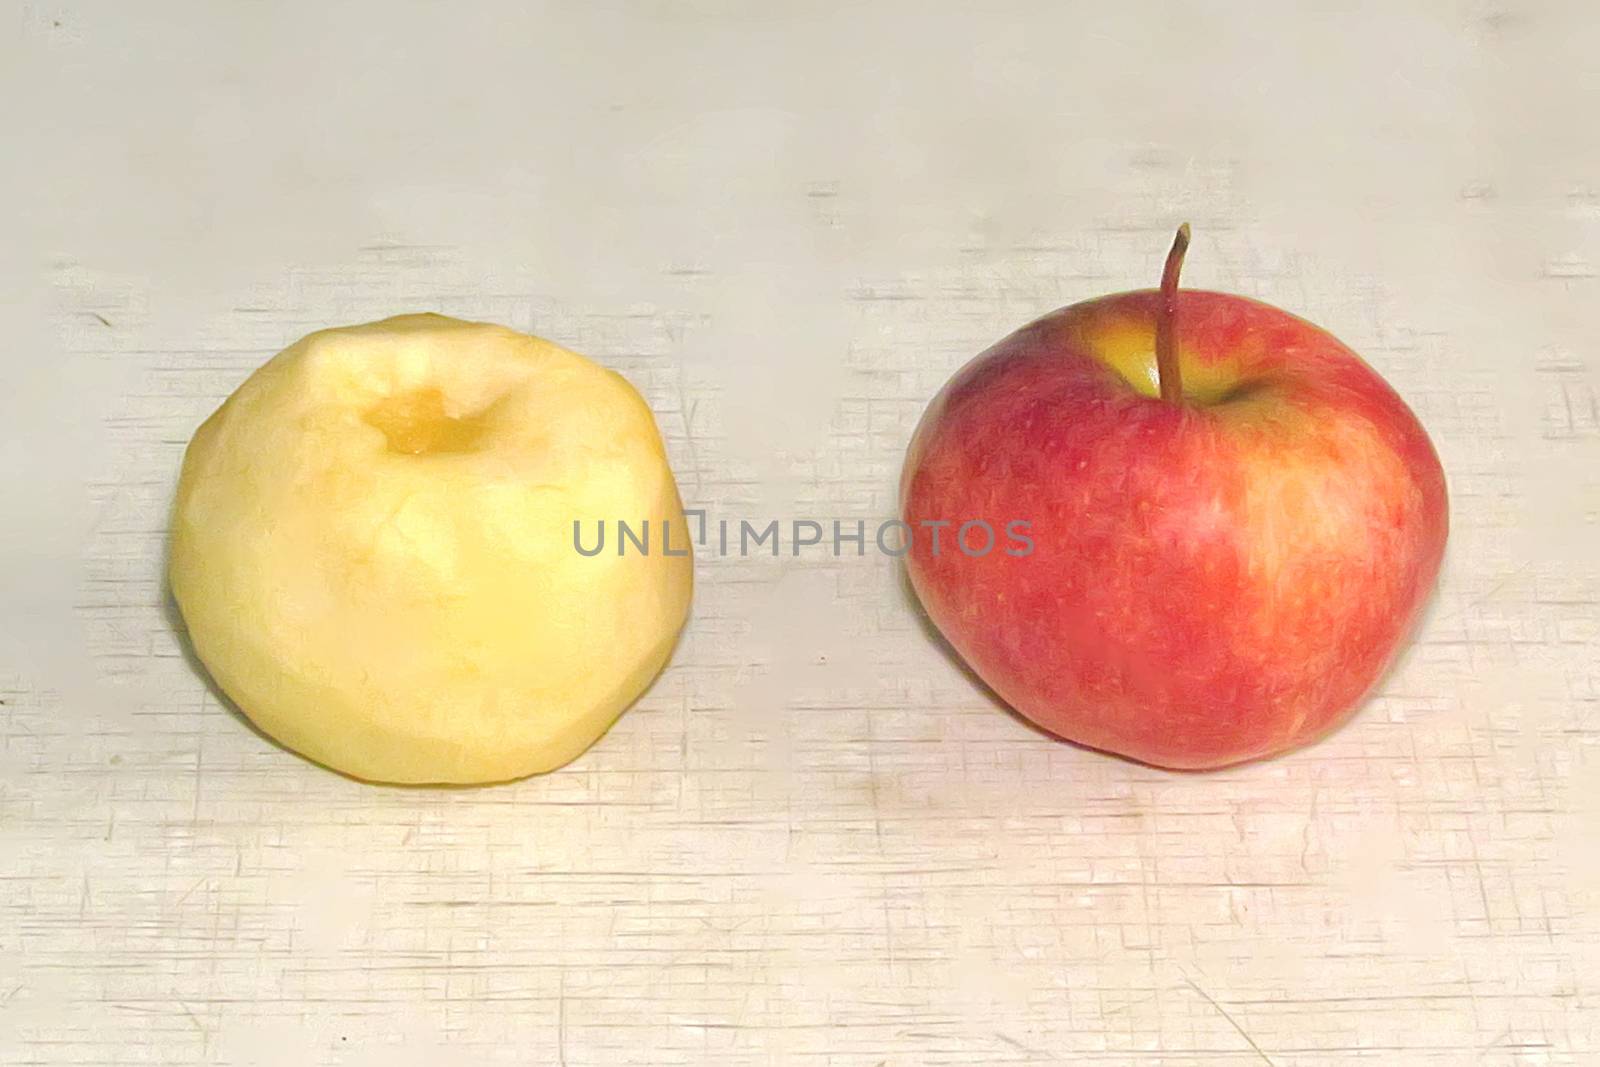  the apple without a peel the apple with a peel on the table by Grishakov